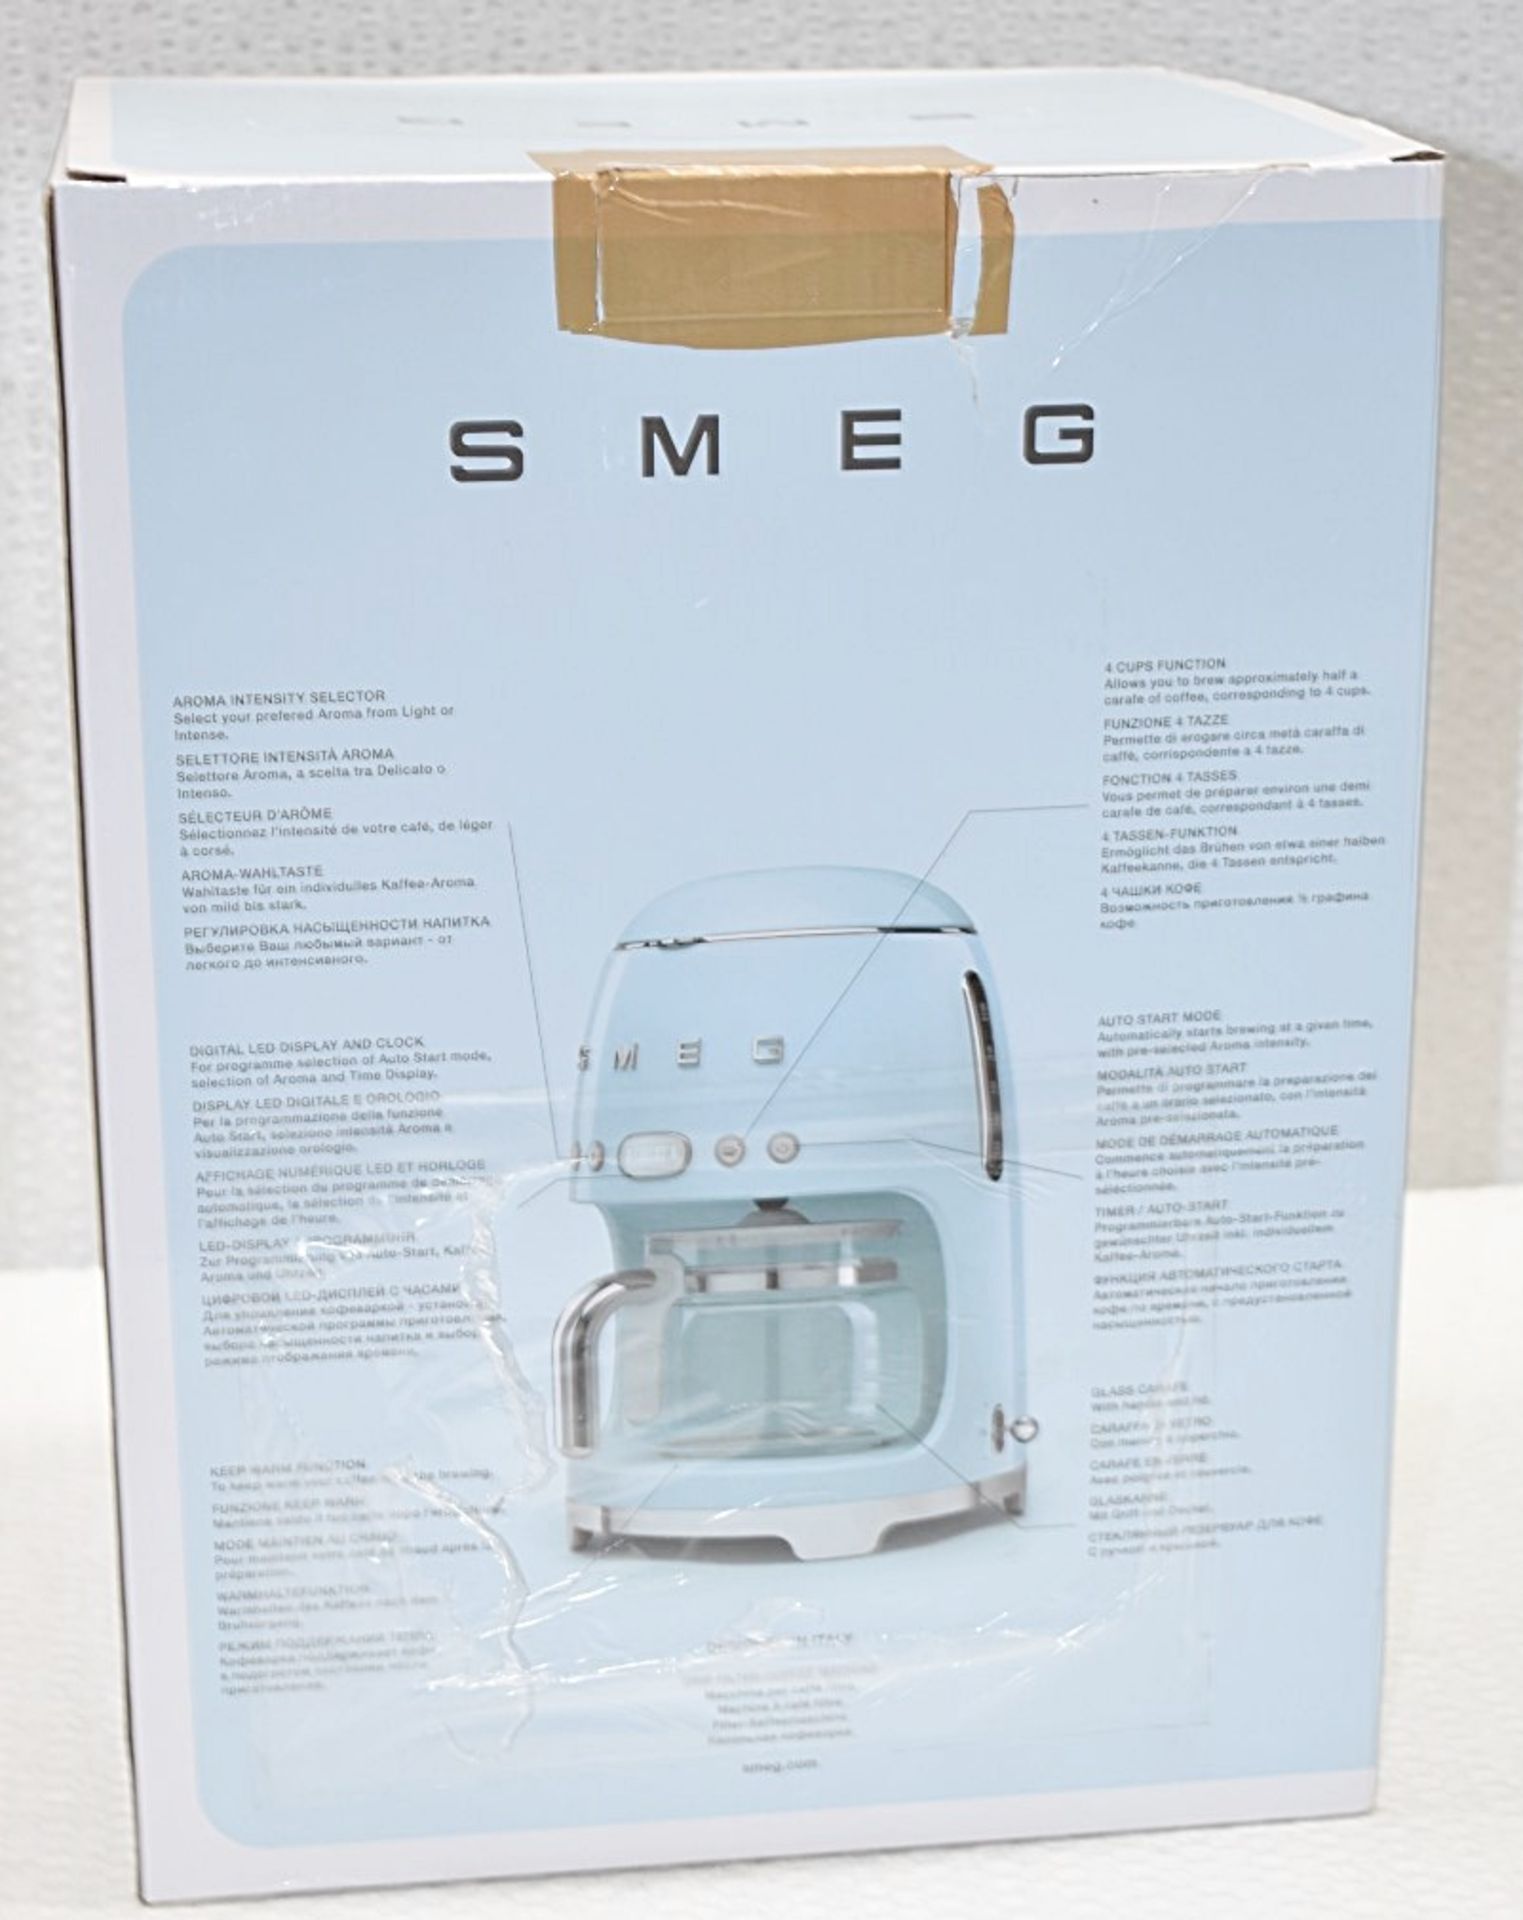 1 x SMEG Drip Retro-Style Filter Coffee Machine In Red, With Reuseable Filter And Digital - Image 6 of 15